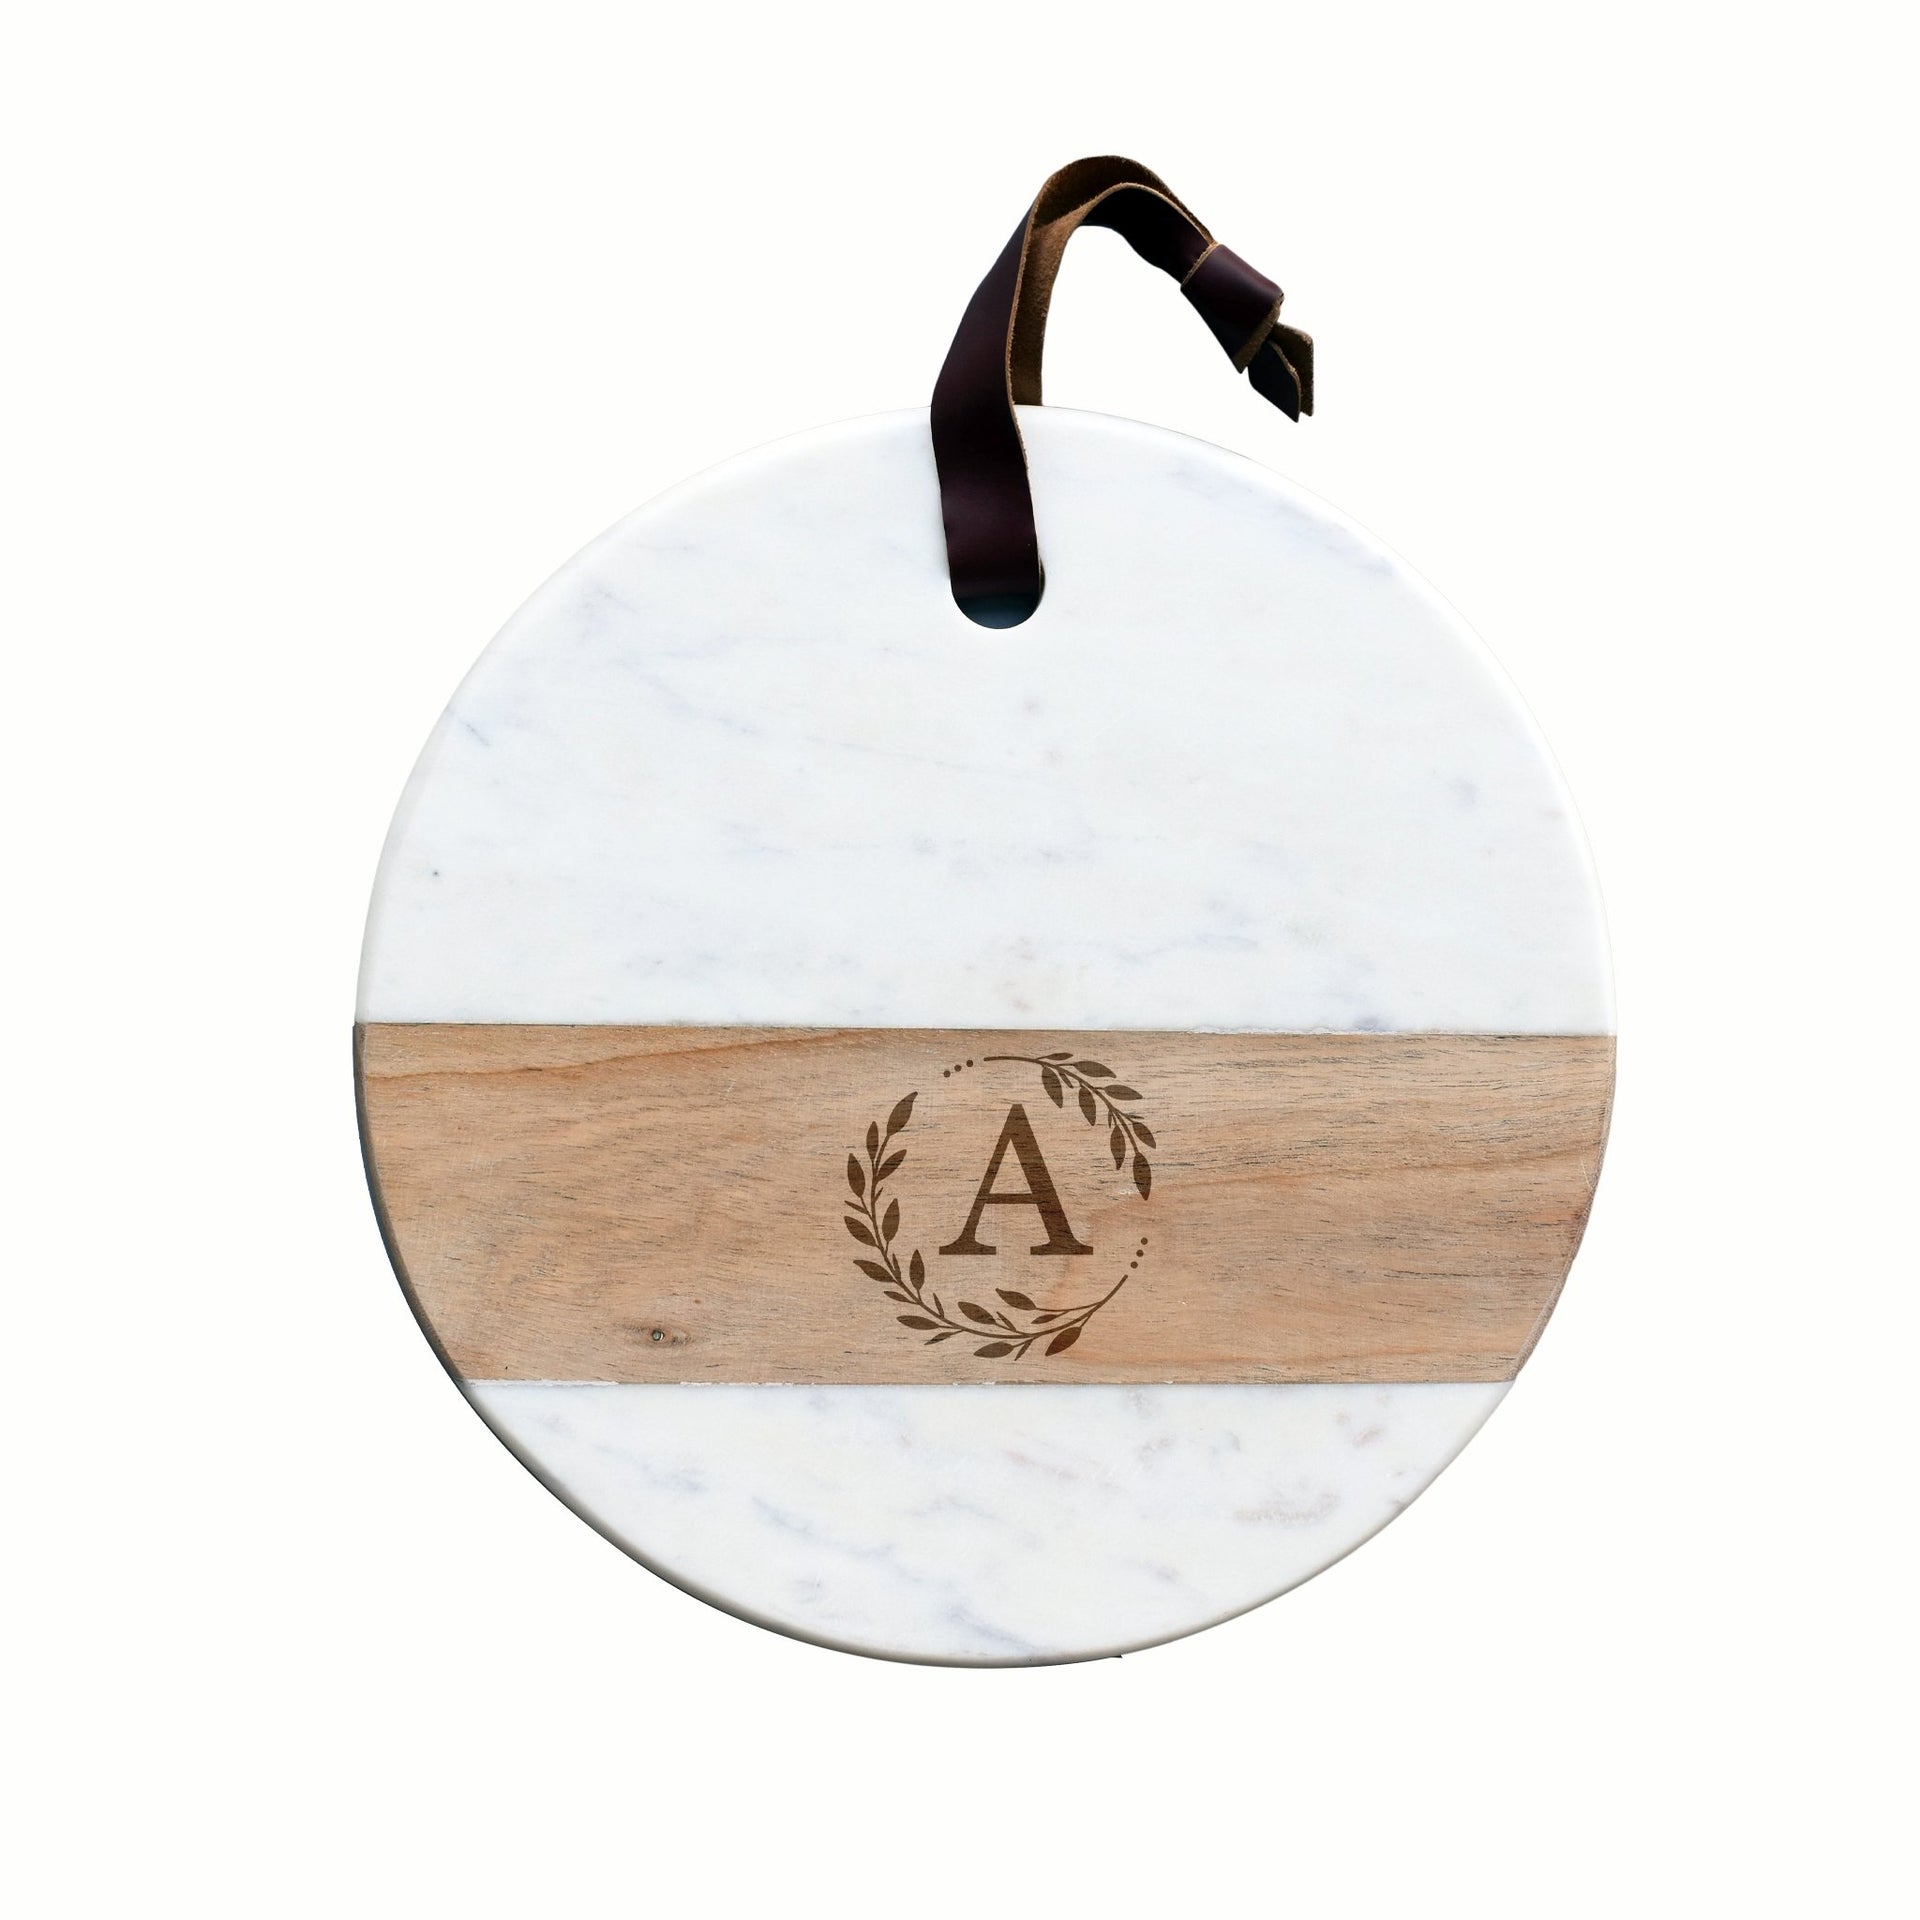 Personalized Marble and Wood Round Serving Board - Mod Peach